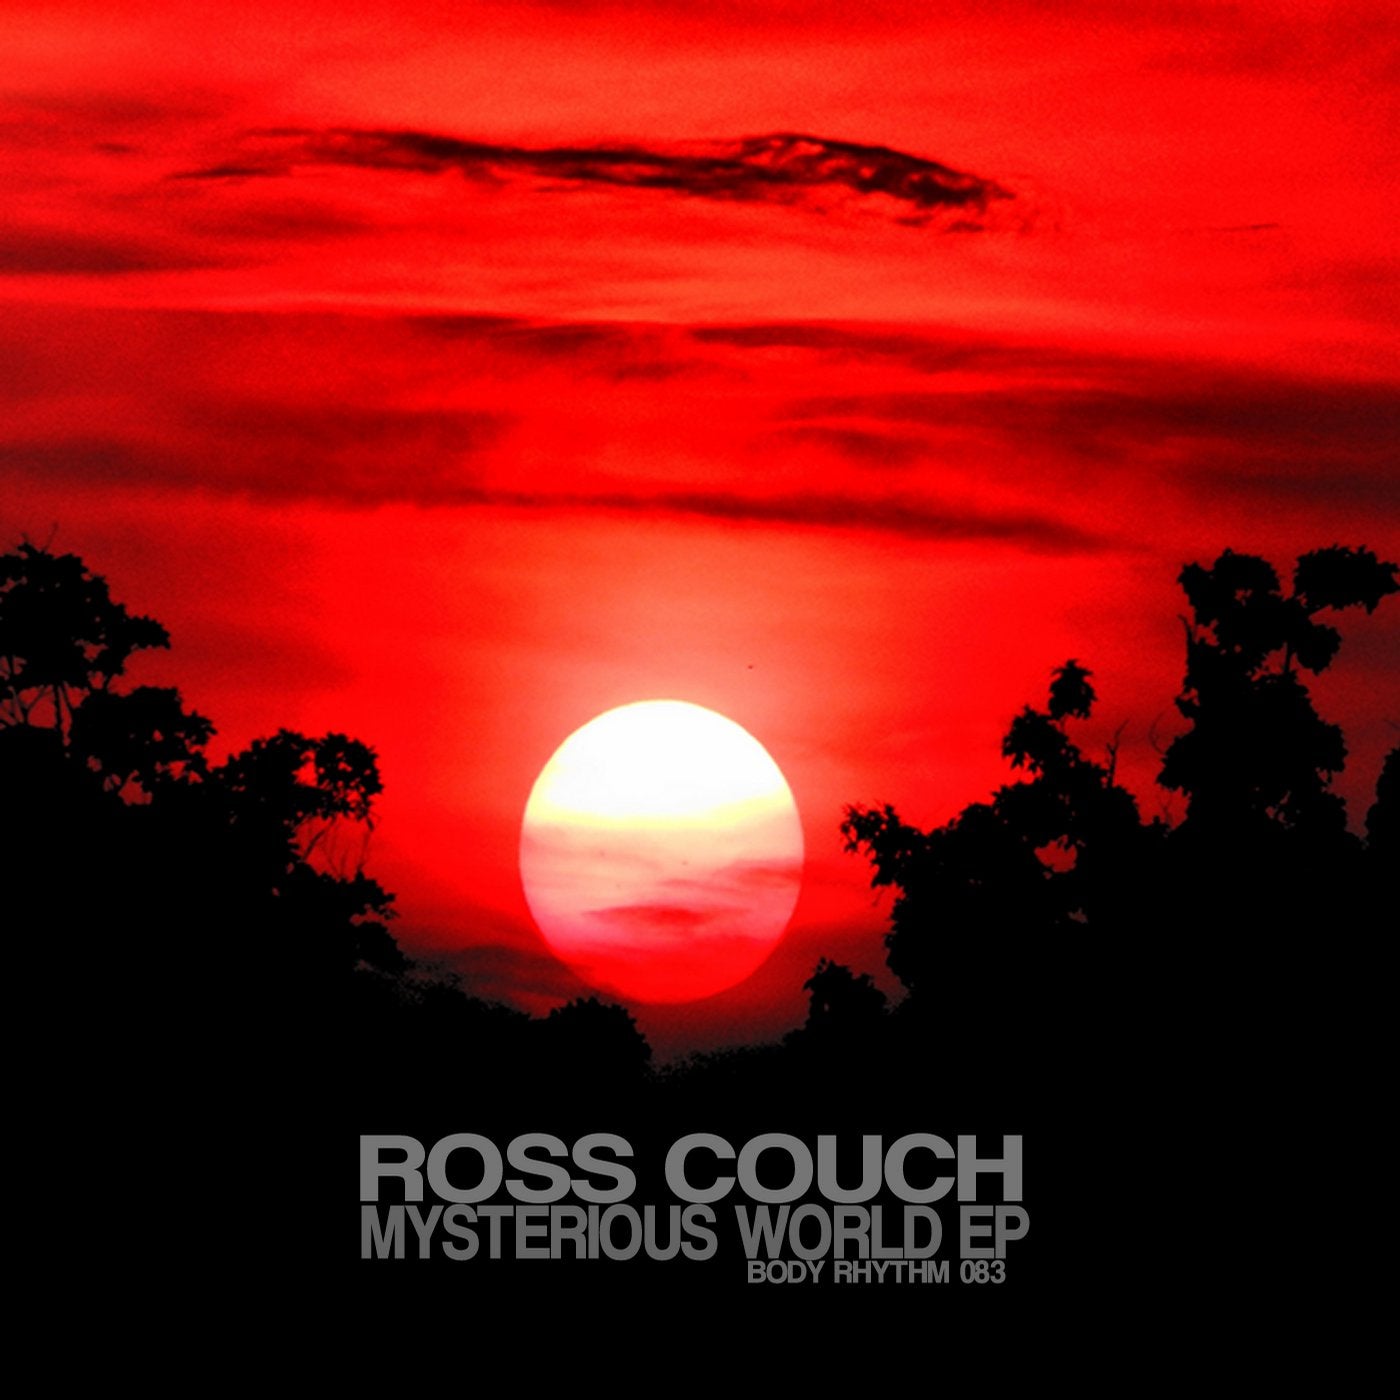 Mysterious World EP